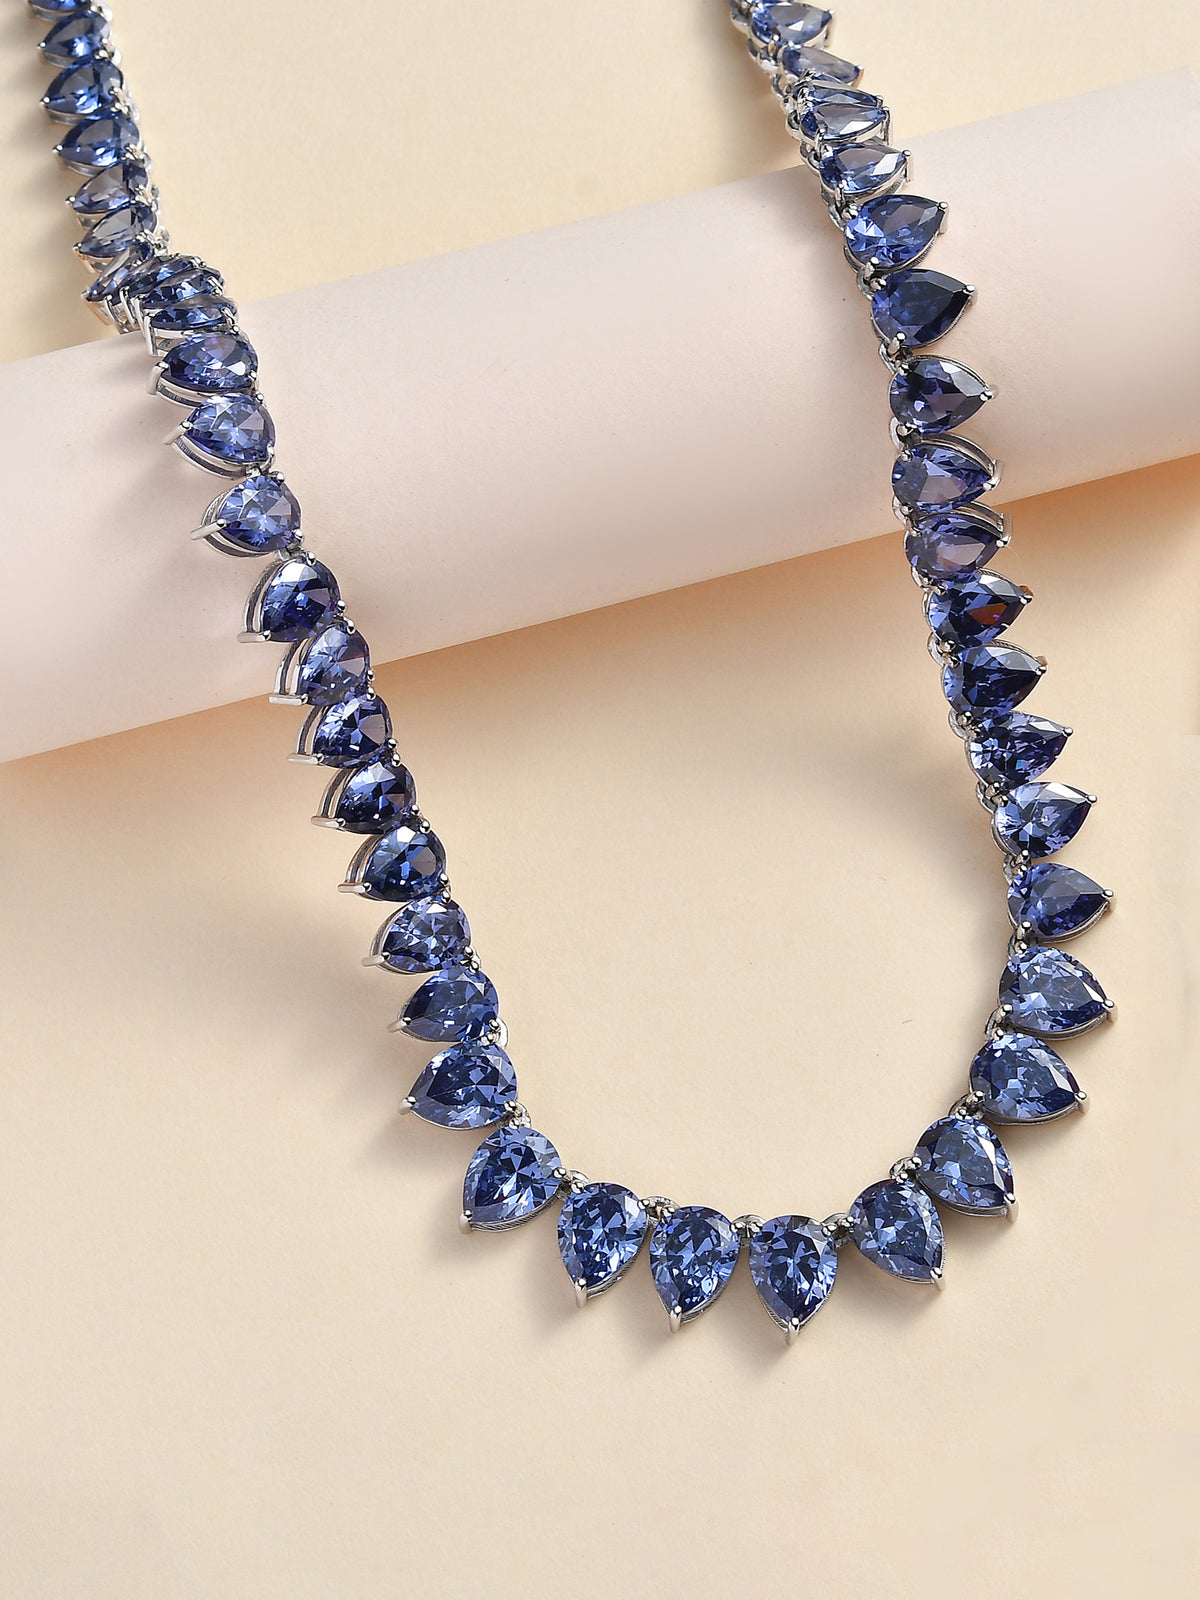 100 Ct. Blue Tanzanite CZ Pear shape Necklace in 925 Sterling Silver